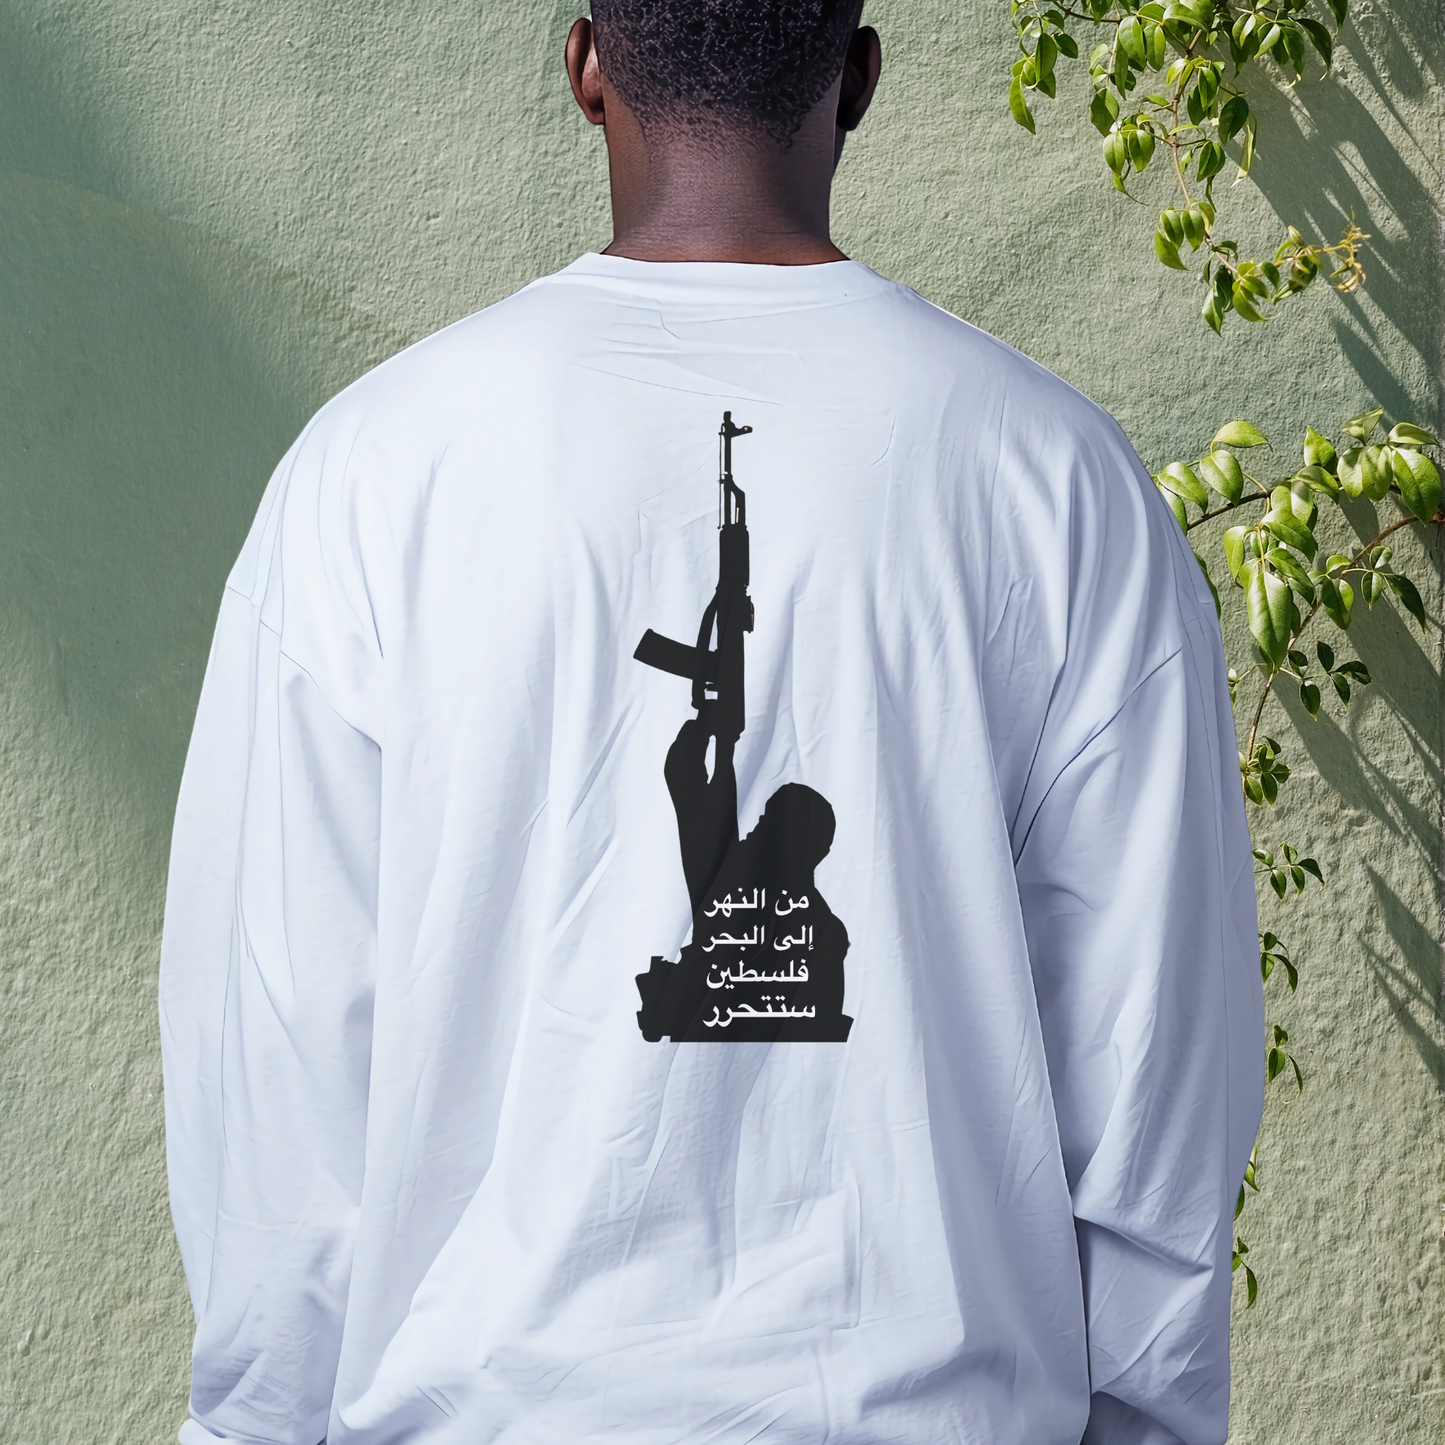 From the River to the Sea Palestine Resistance Long Sleeve Tshirt